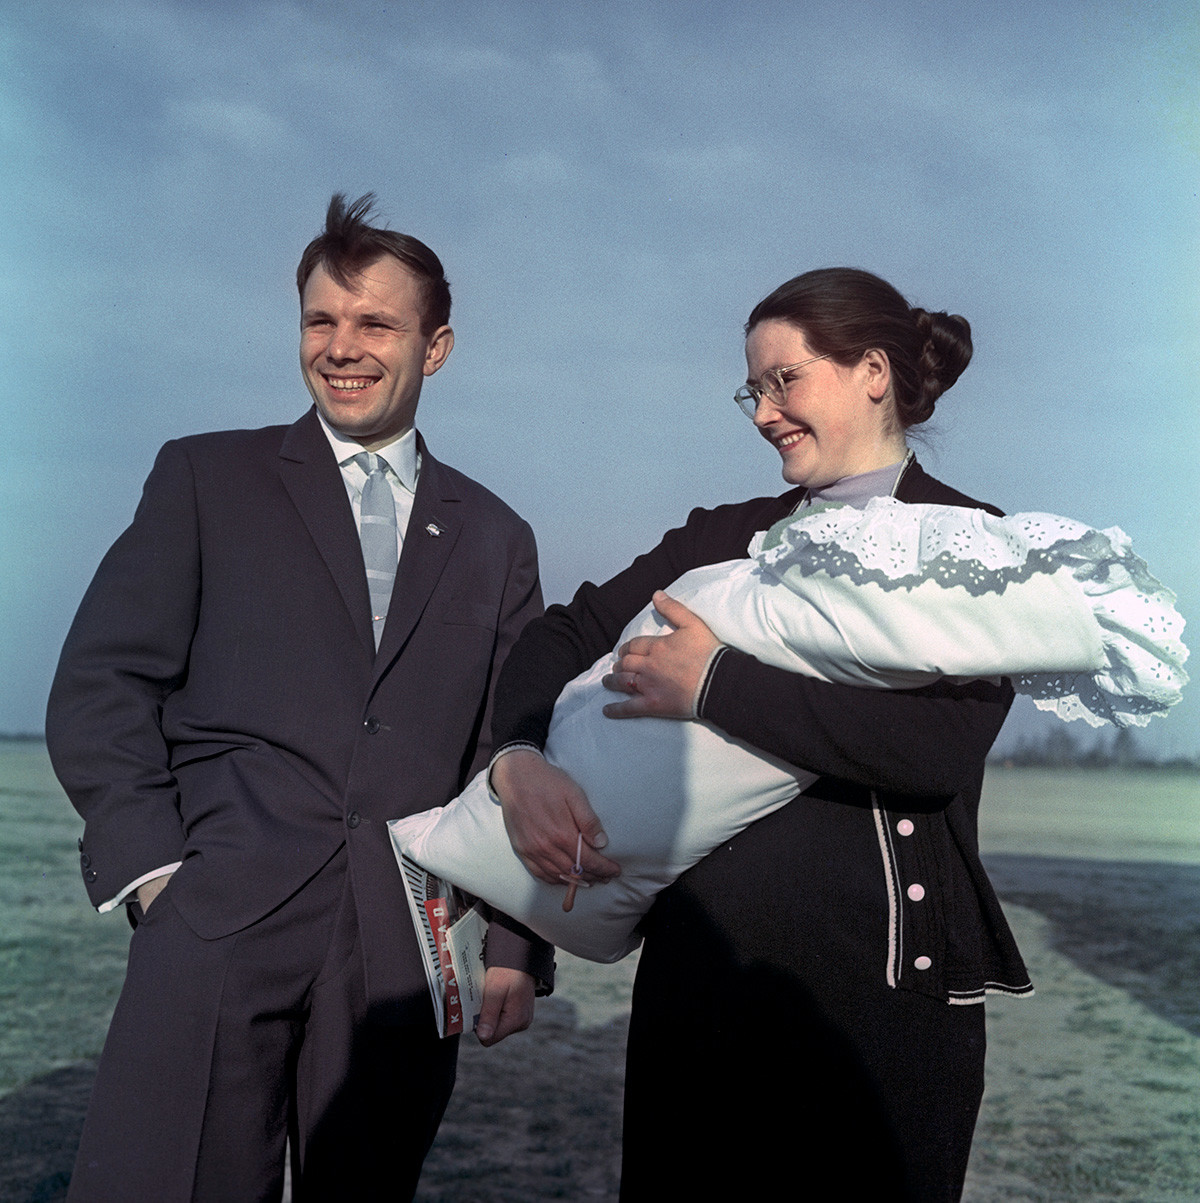 Yuri Gagarin with his wife Valentina and daughter Galina on May 1, 1961. Galina works today as an economist.